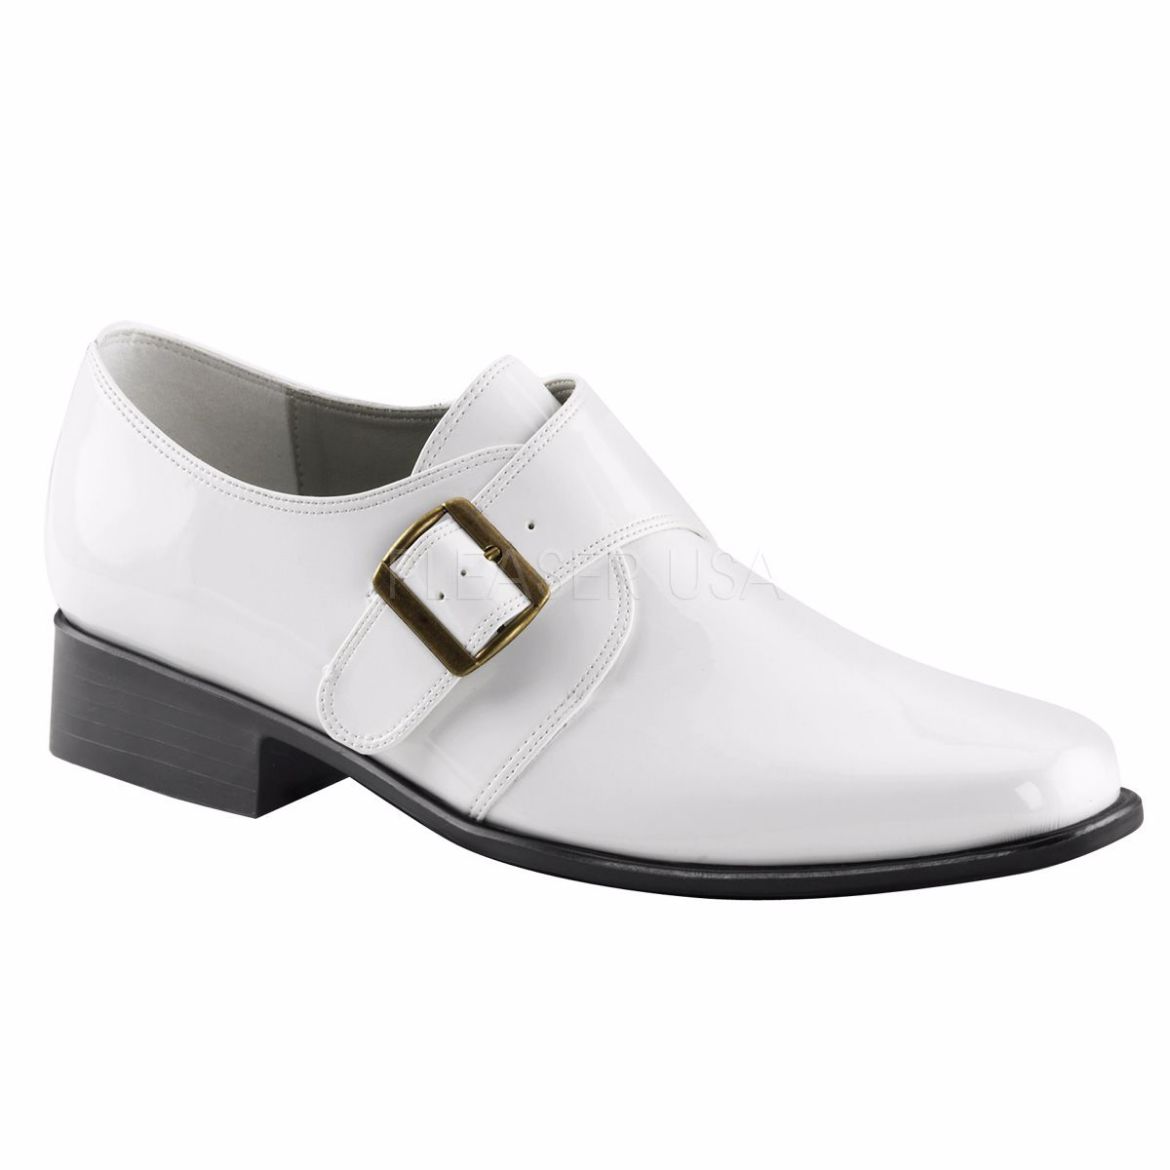 Product image of Funtasma Loafer-12 White Pu, 1 1/2 inch (3.8 cm) Heel Court Pump Shoes